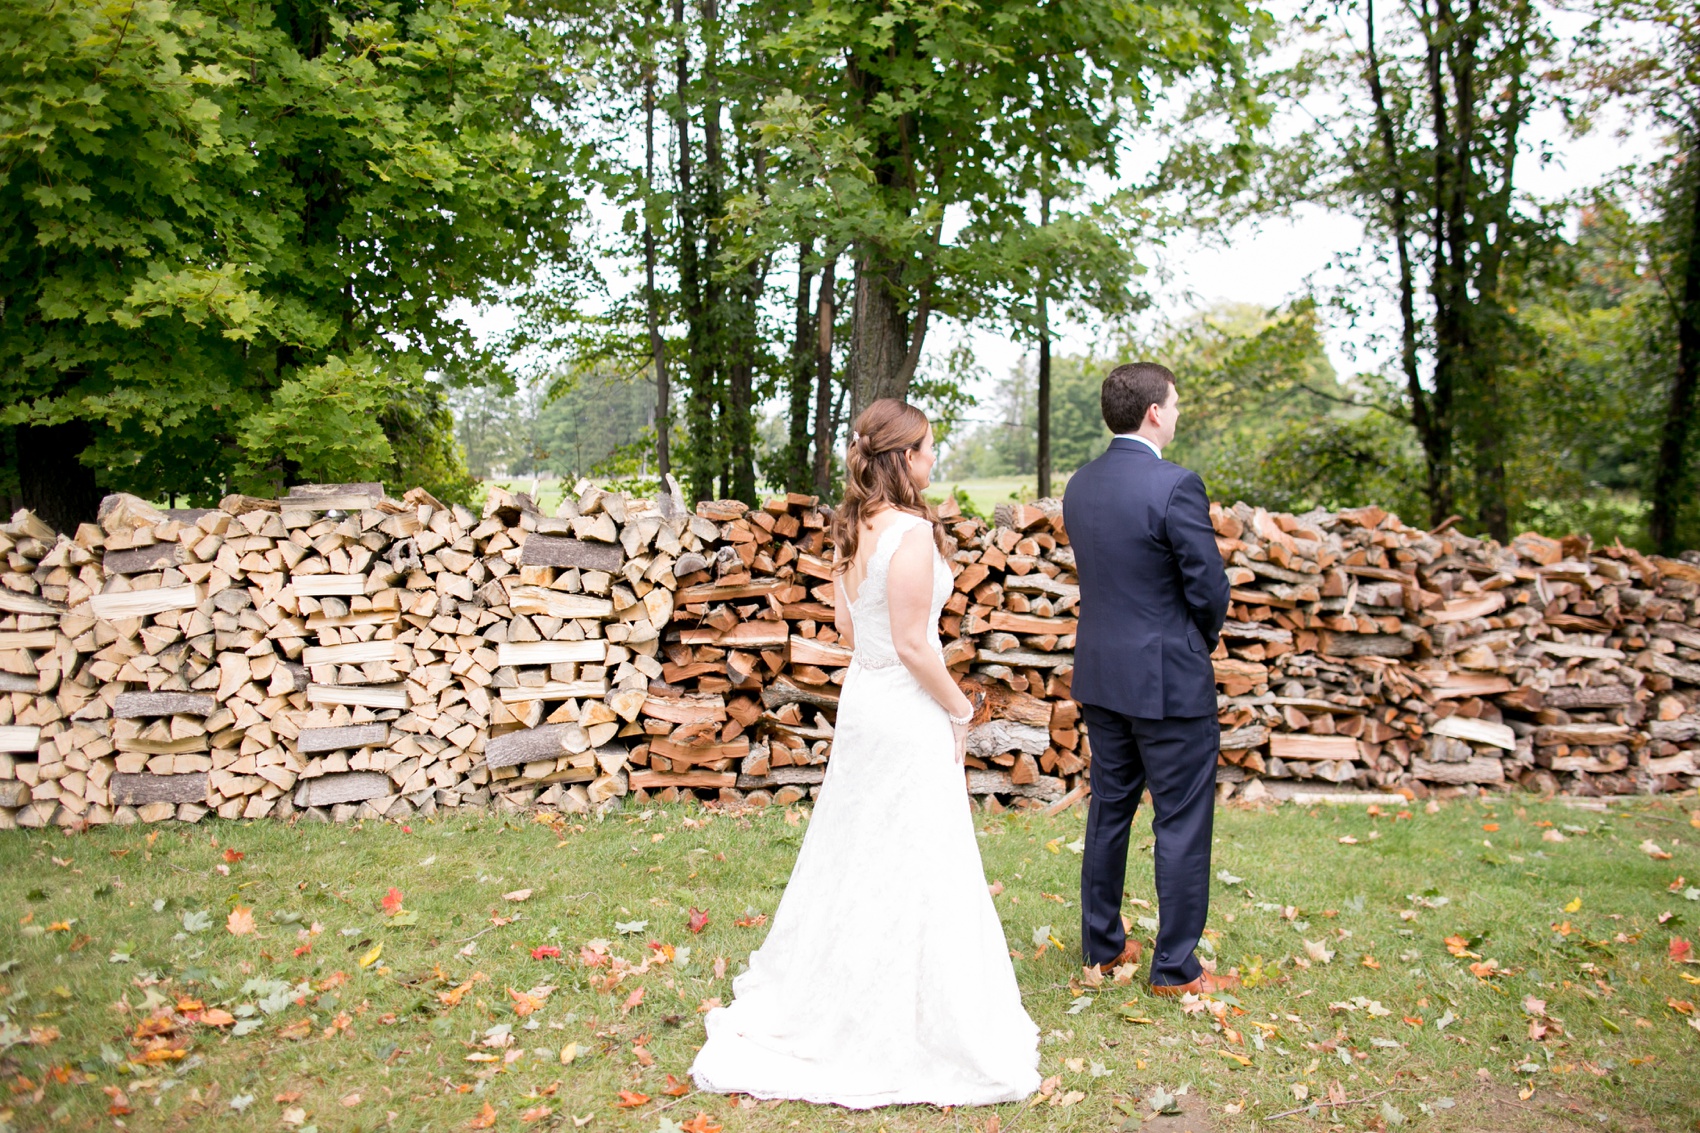 A Red Maple Vineyard wedding first look. Photo by NYC wedding photographer Mikkel Paige Photography.